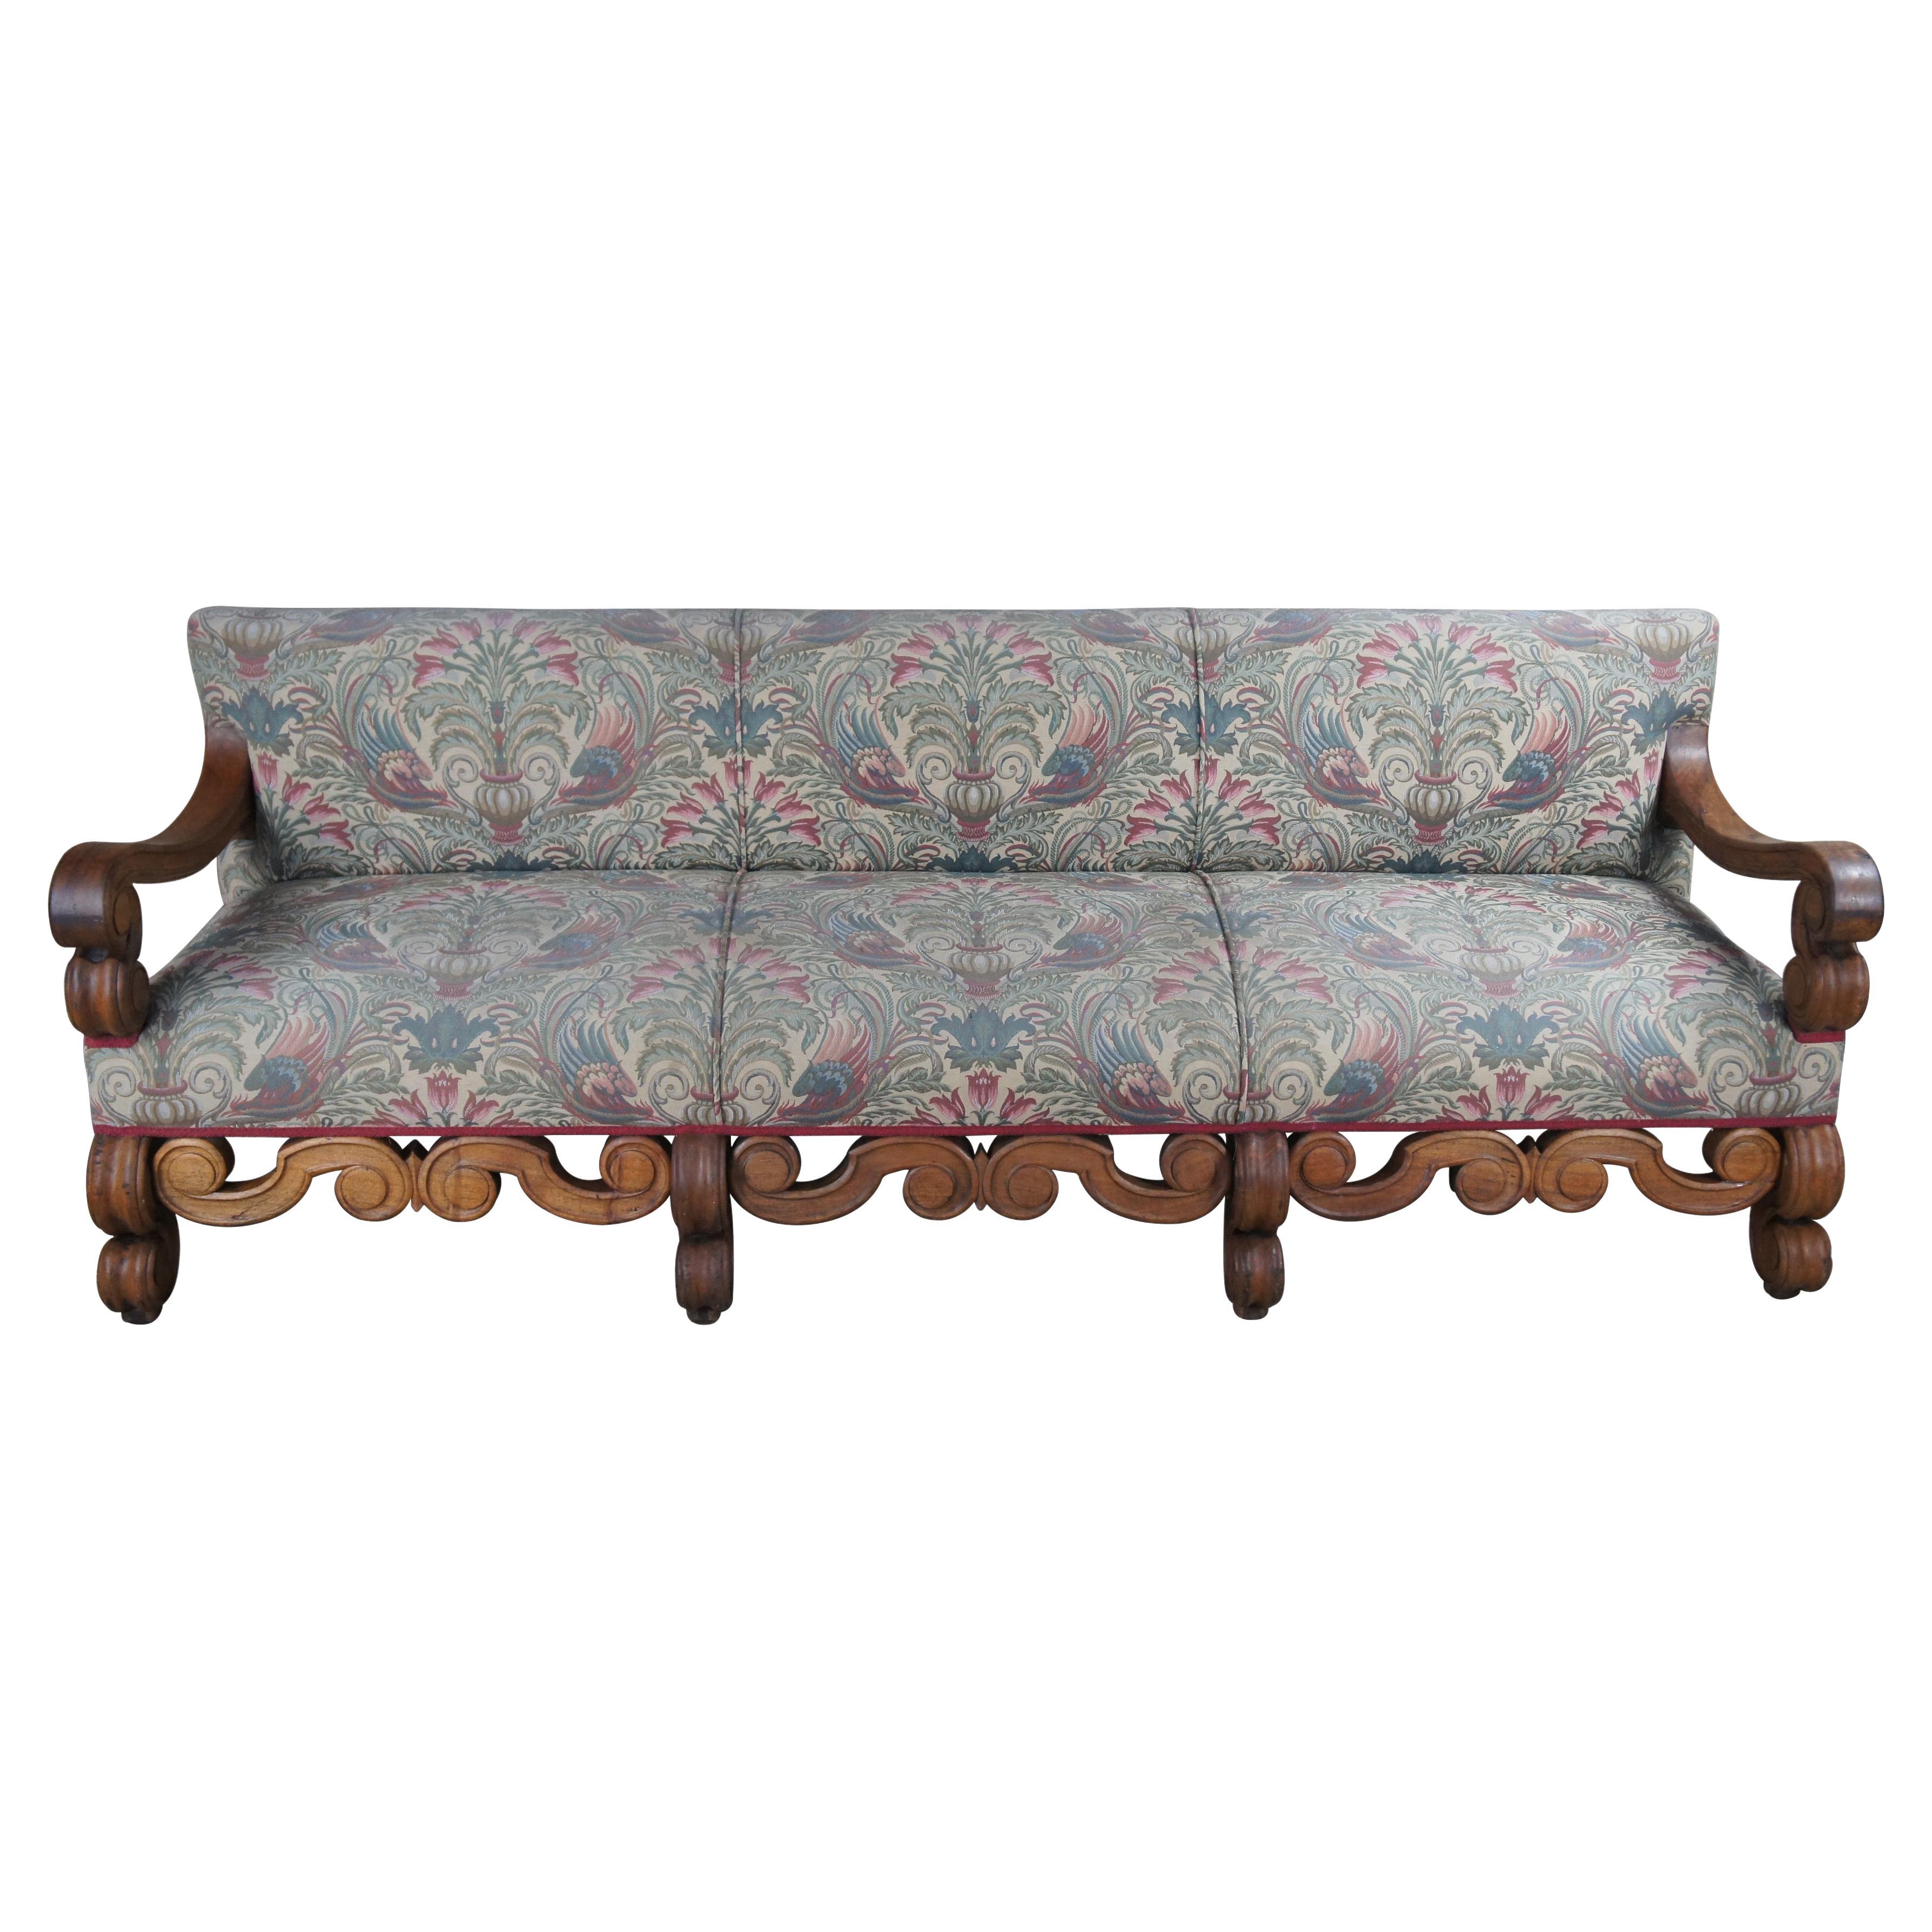 Antique 18th C. William & Mary Mahogany Carved Settle Bench Sofa Empress Hotel For Sale